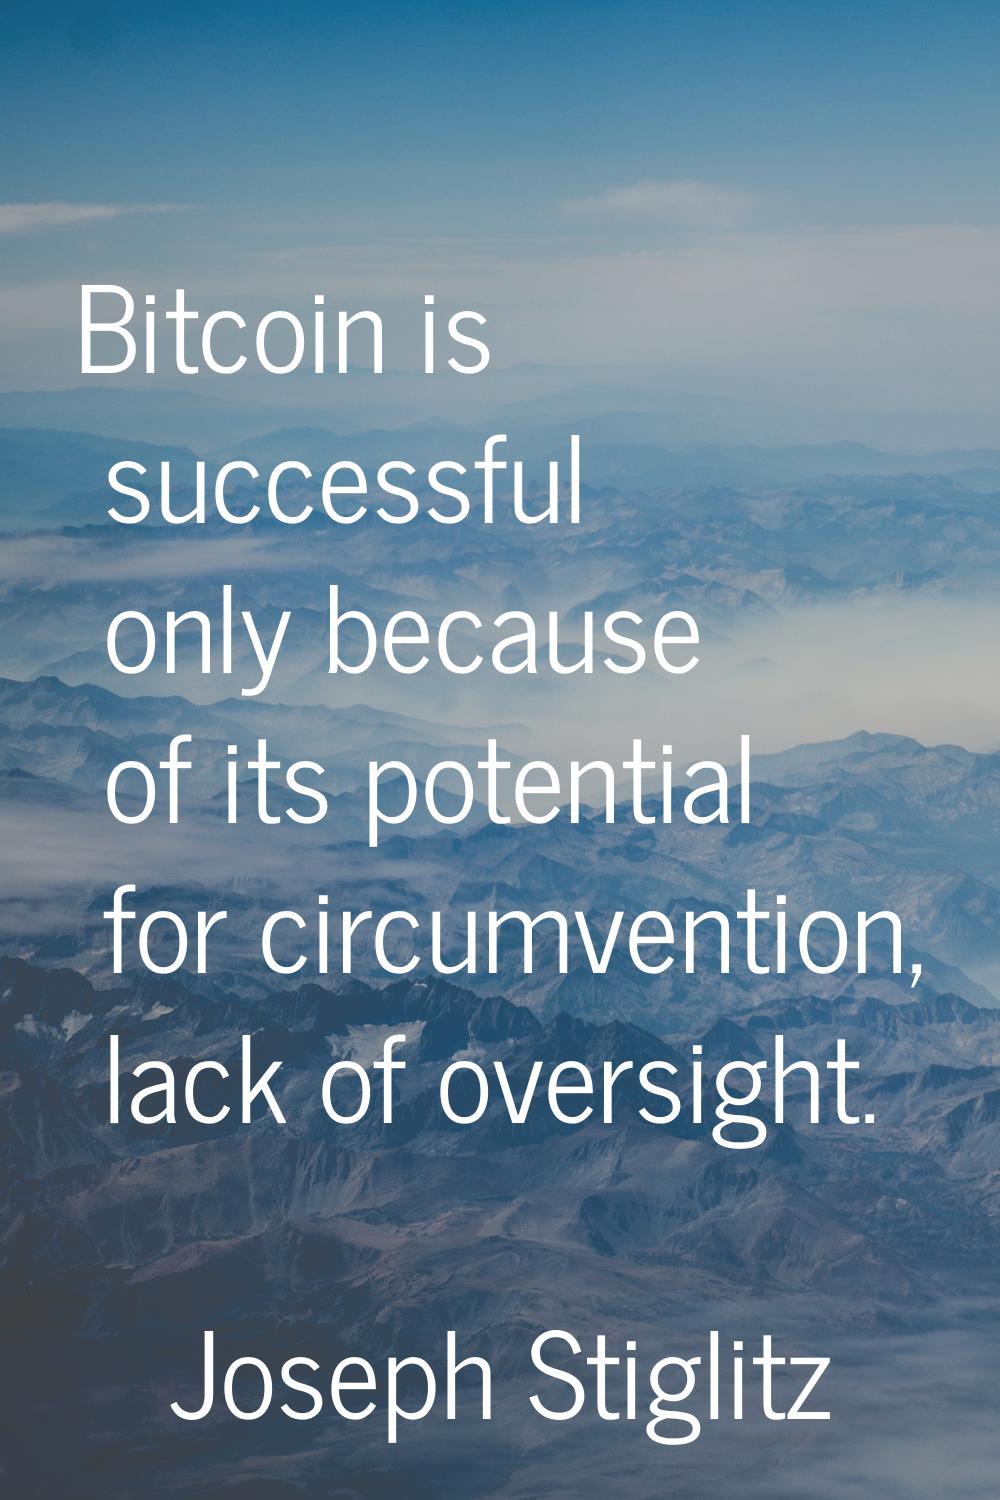 Bitcoin is successful only because of its potential for circumvention, lack of oversight.